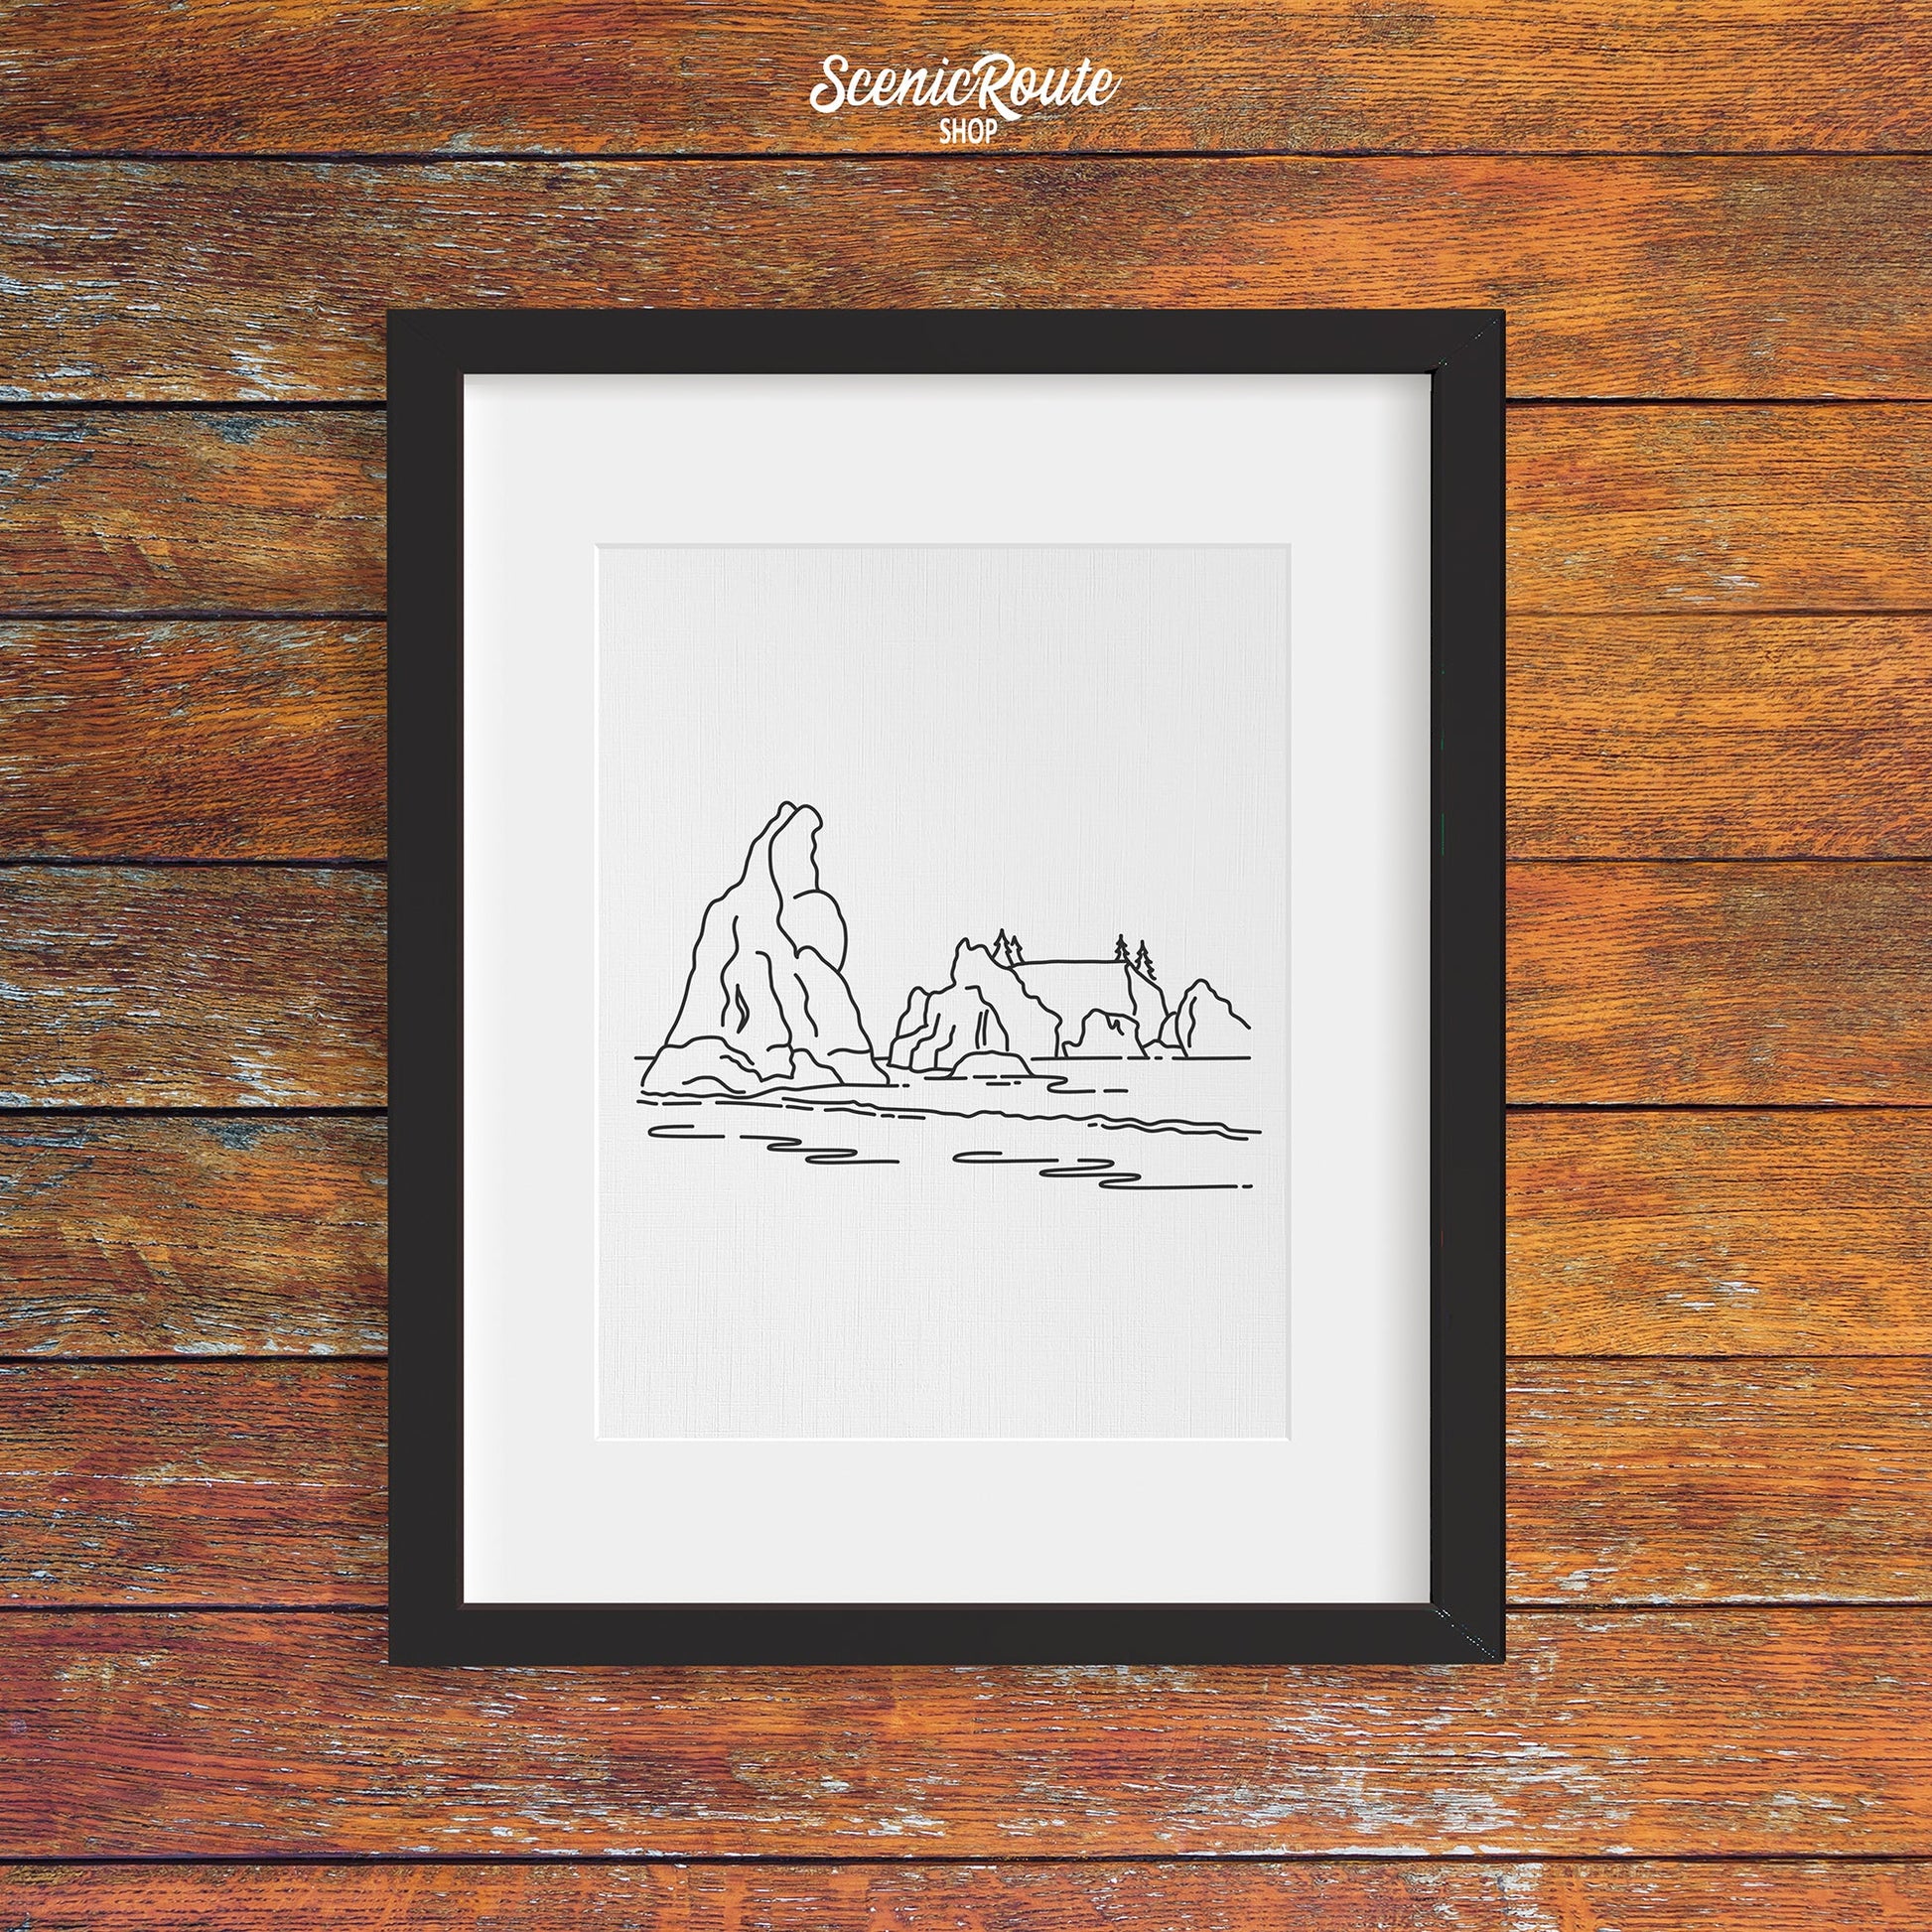 A framed line art drawing of Olympic National Park on a wood wall